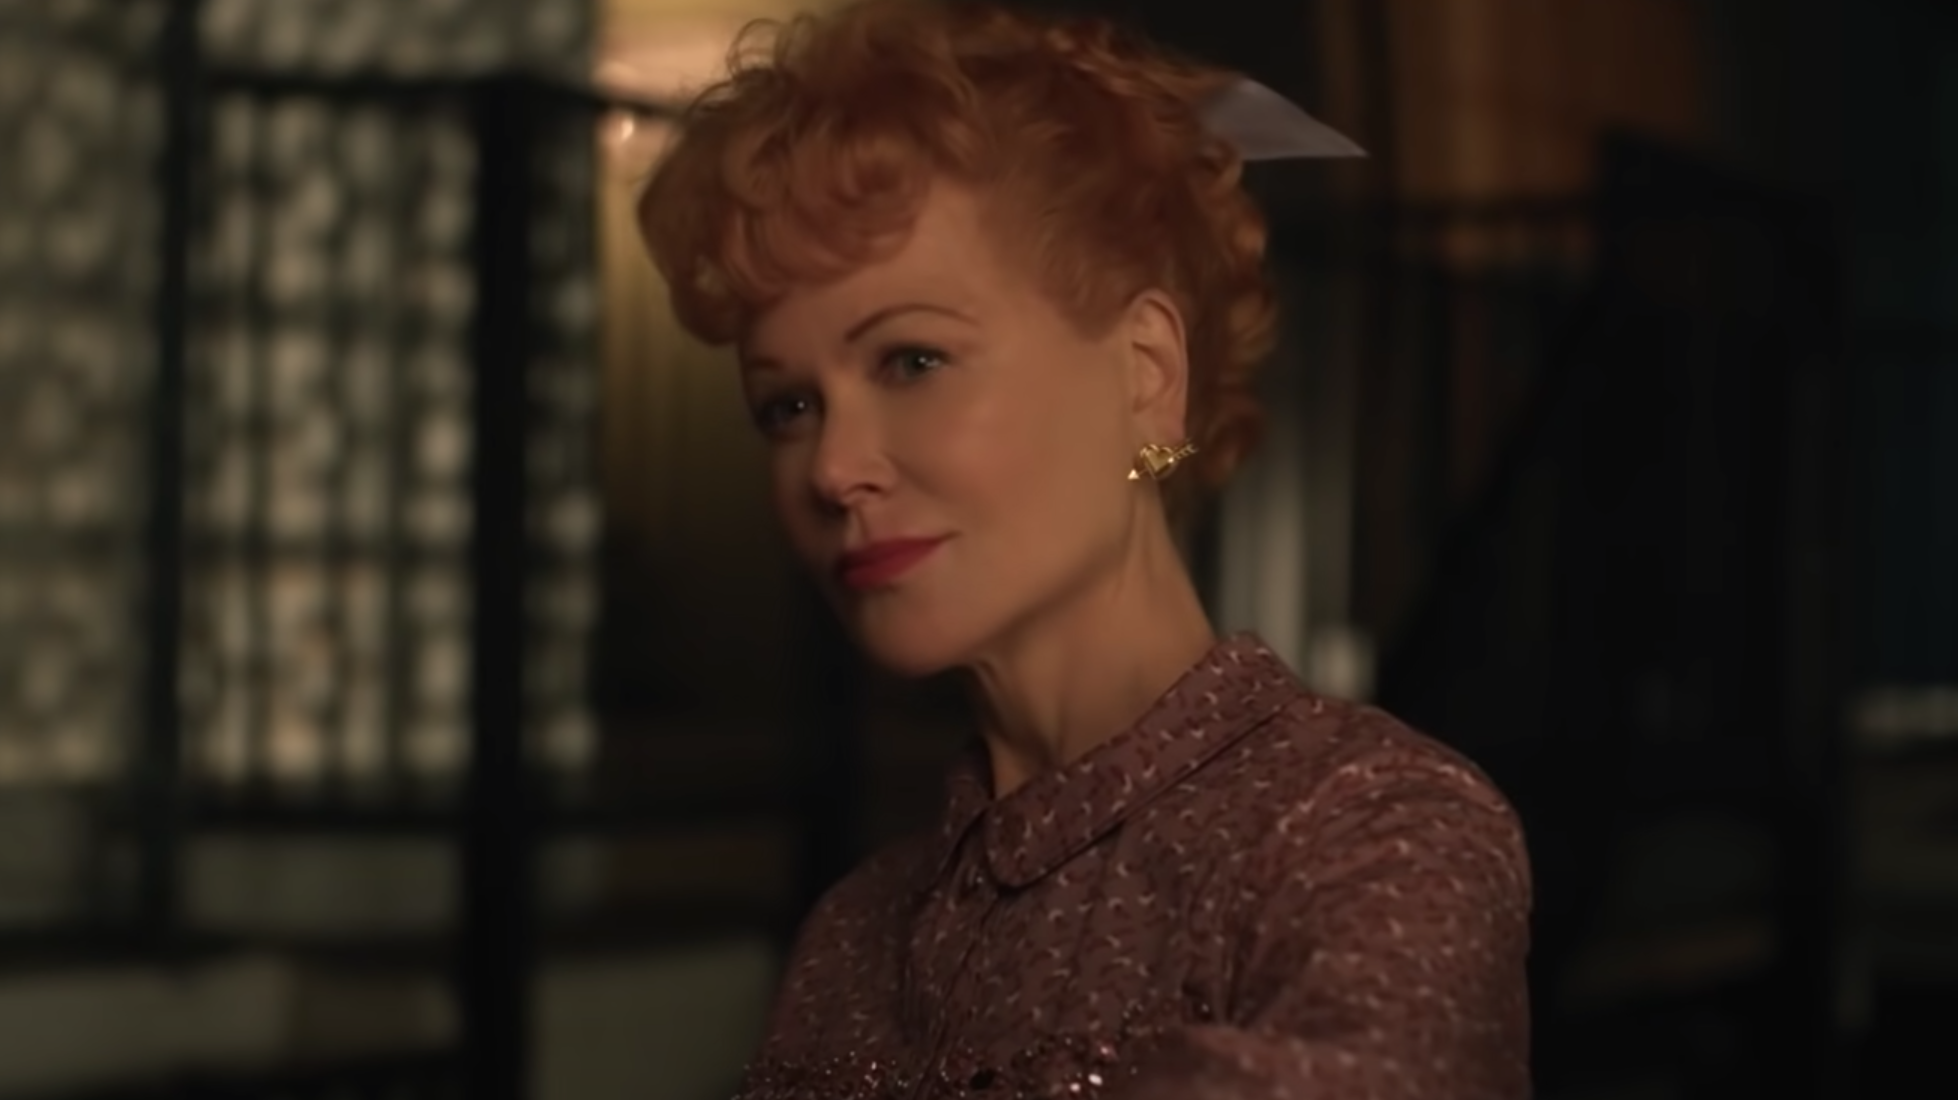 Nicole Kidman almost backed out of playing Lucille Ball after receiving backlash for not resembling her